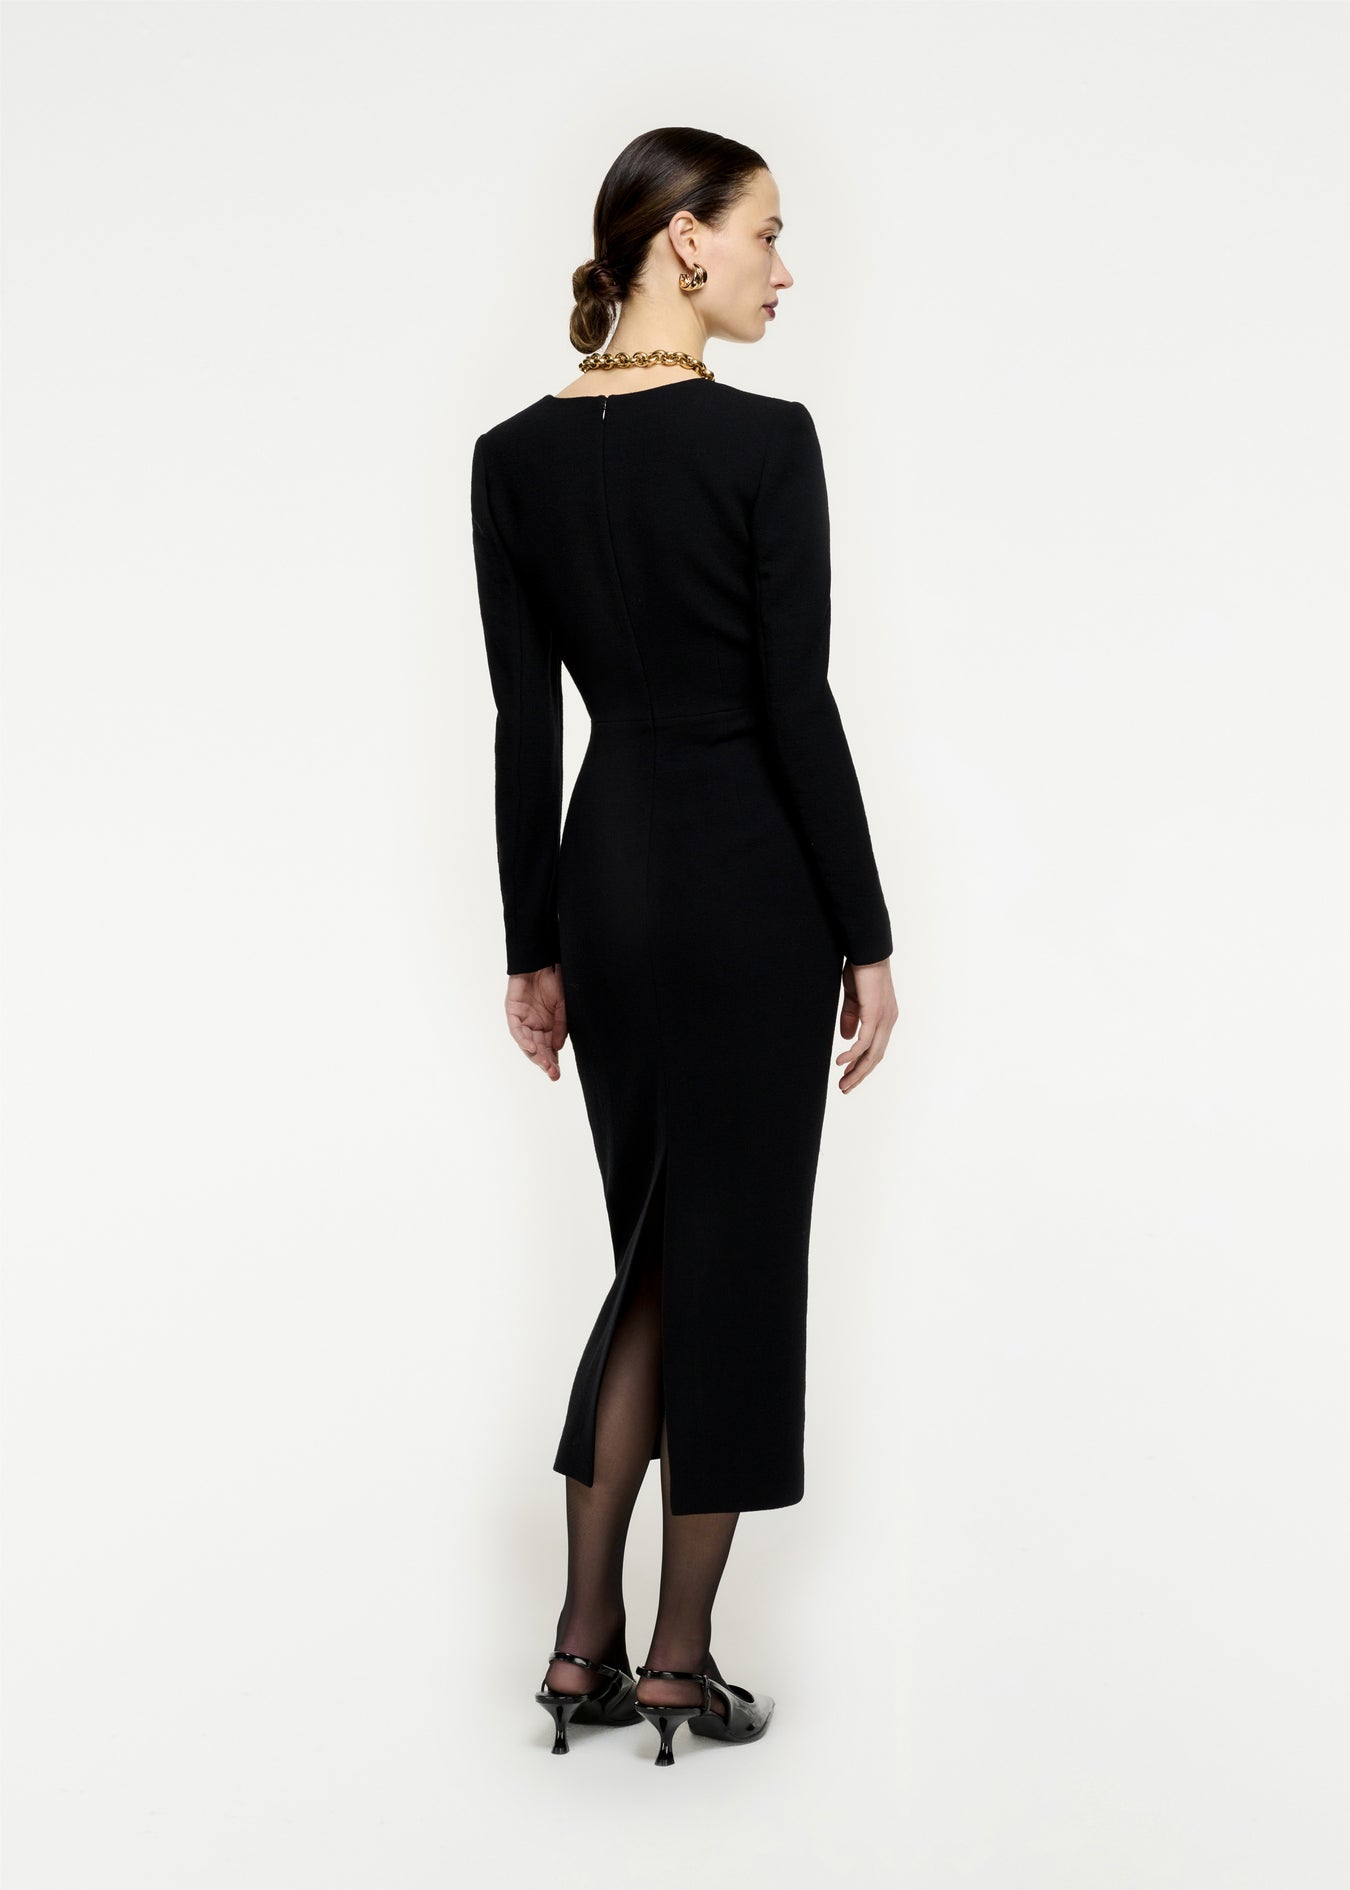 The back of a woman wearing the Long Sleeve Wool Crepe Midi Dress in Black